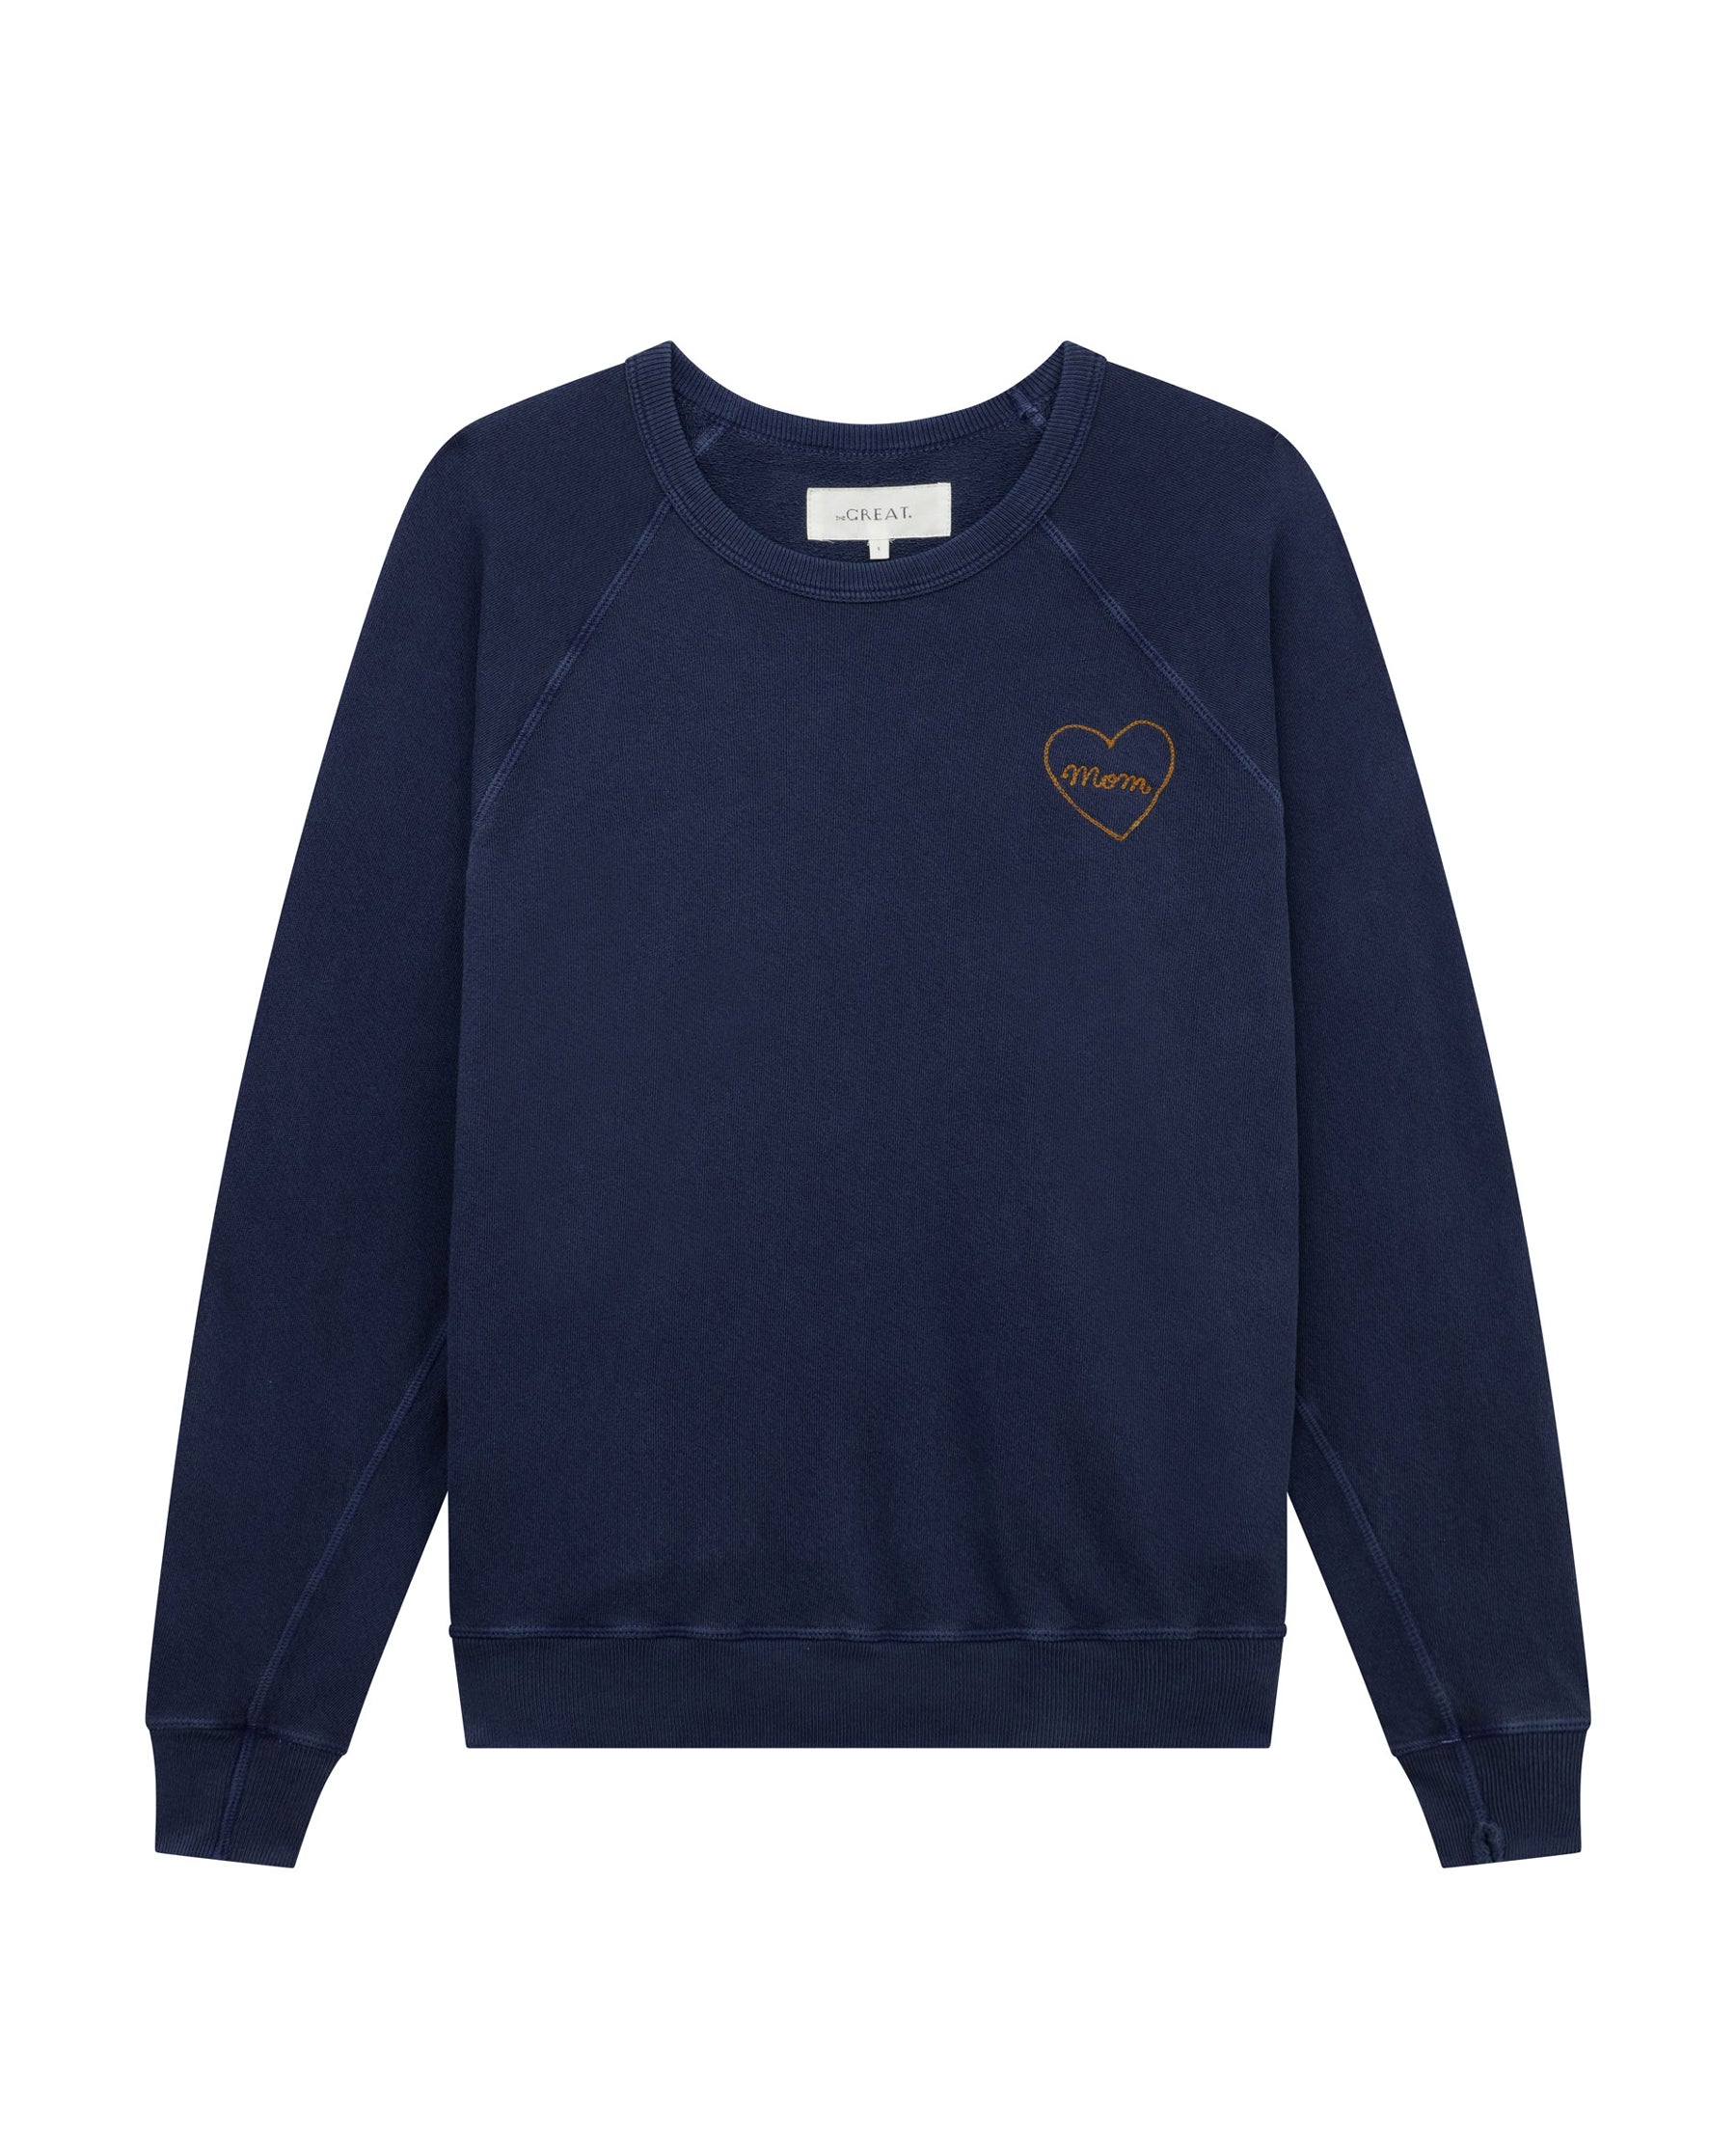 The Mom Embroidered College Sweatshirt. -- Navy with Spice SWEATSHIRTS THE GREAT. SP23 MOM